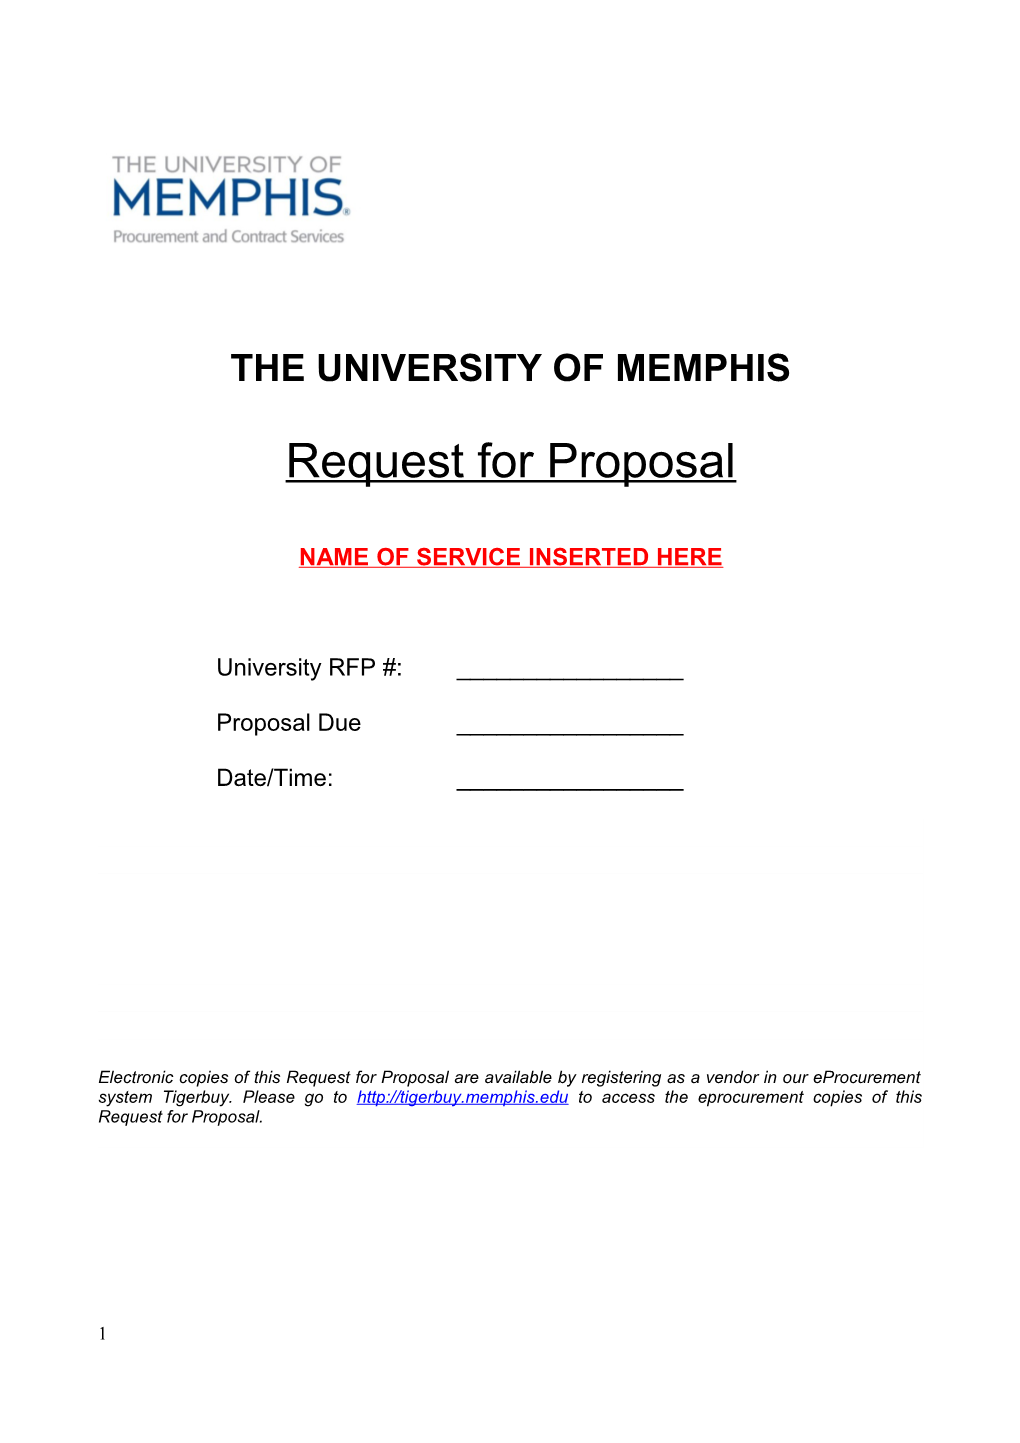 Request for Proposal Format